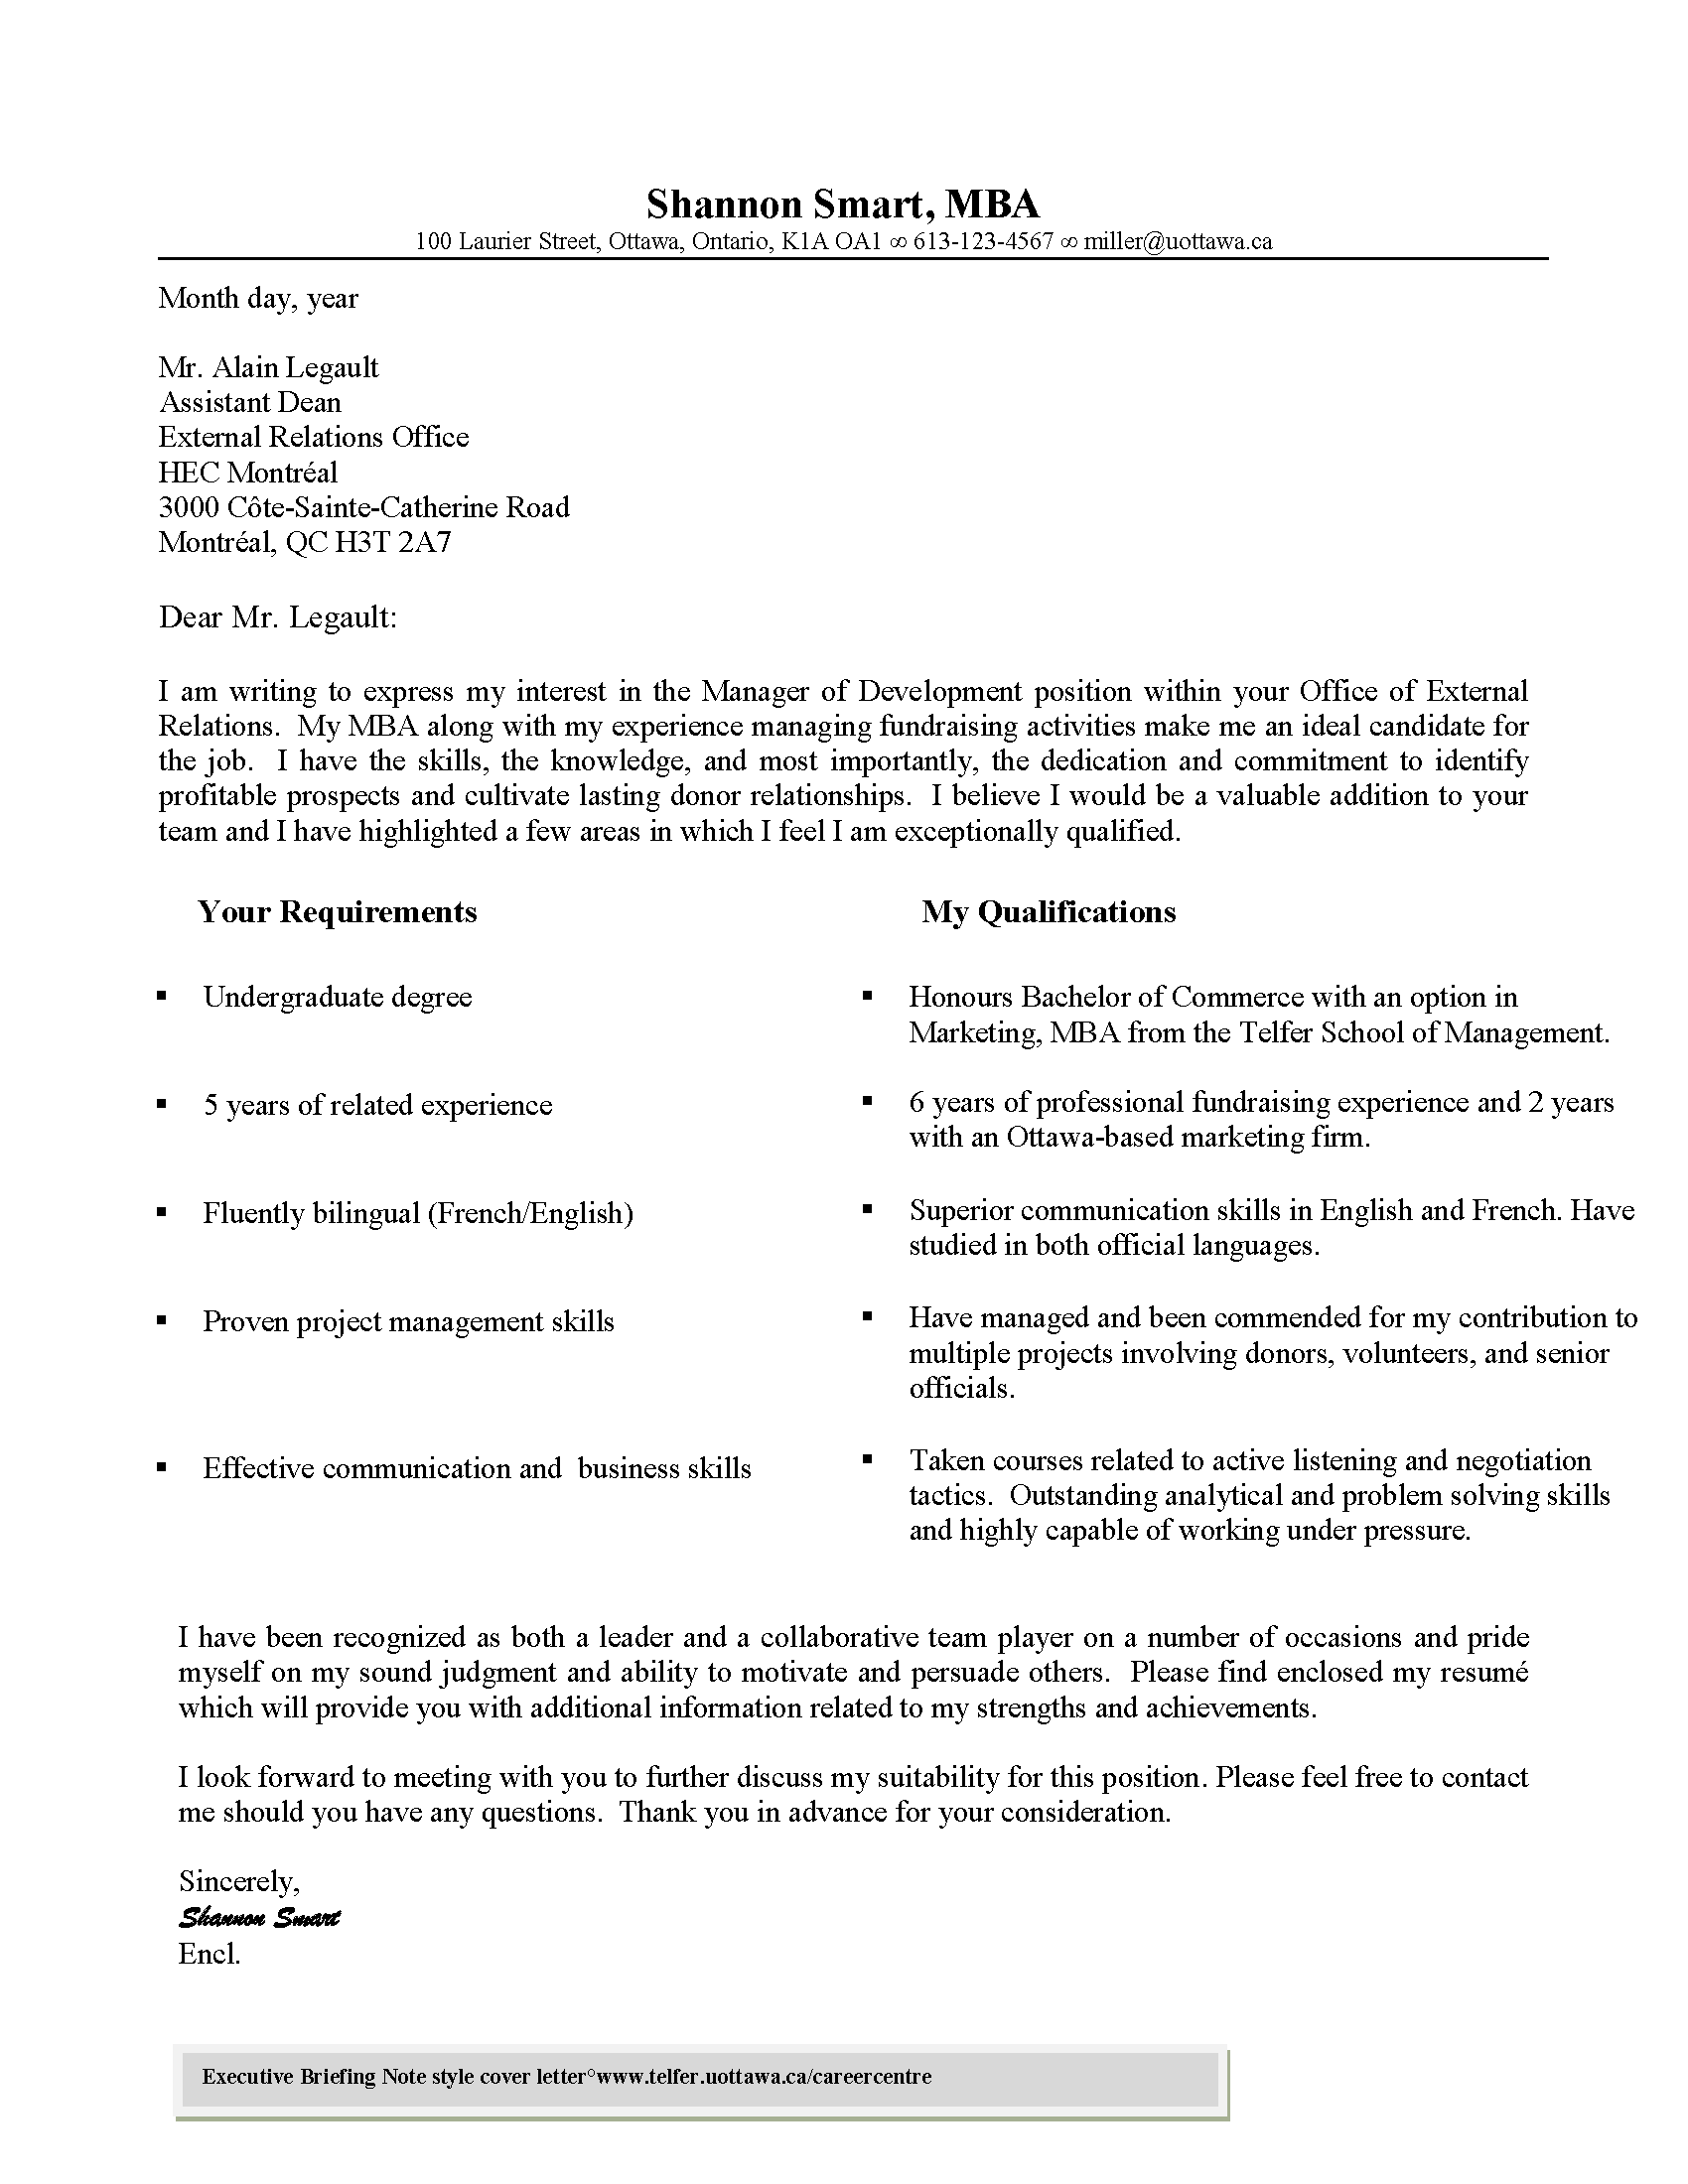 Cover Letters Example Executive Briefing Note Style Cover Letter Example cover letters example|wikiresume.com